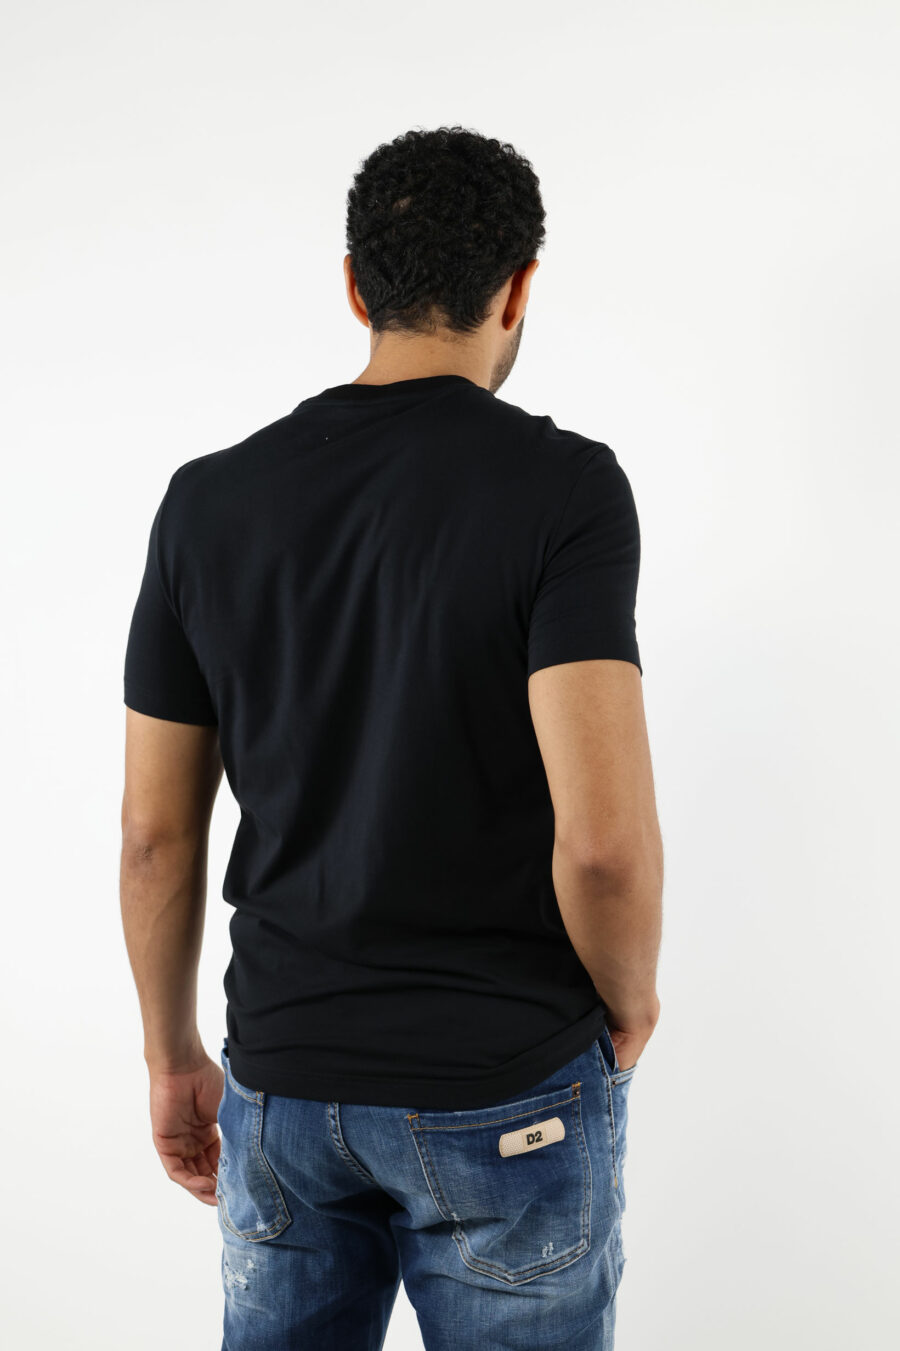 Black T-shirt with logo label - 111199